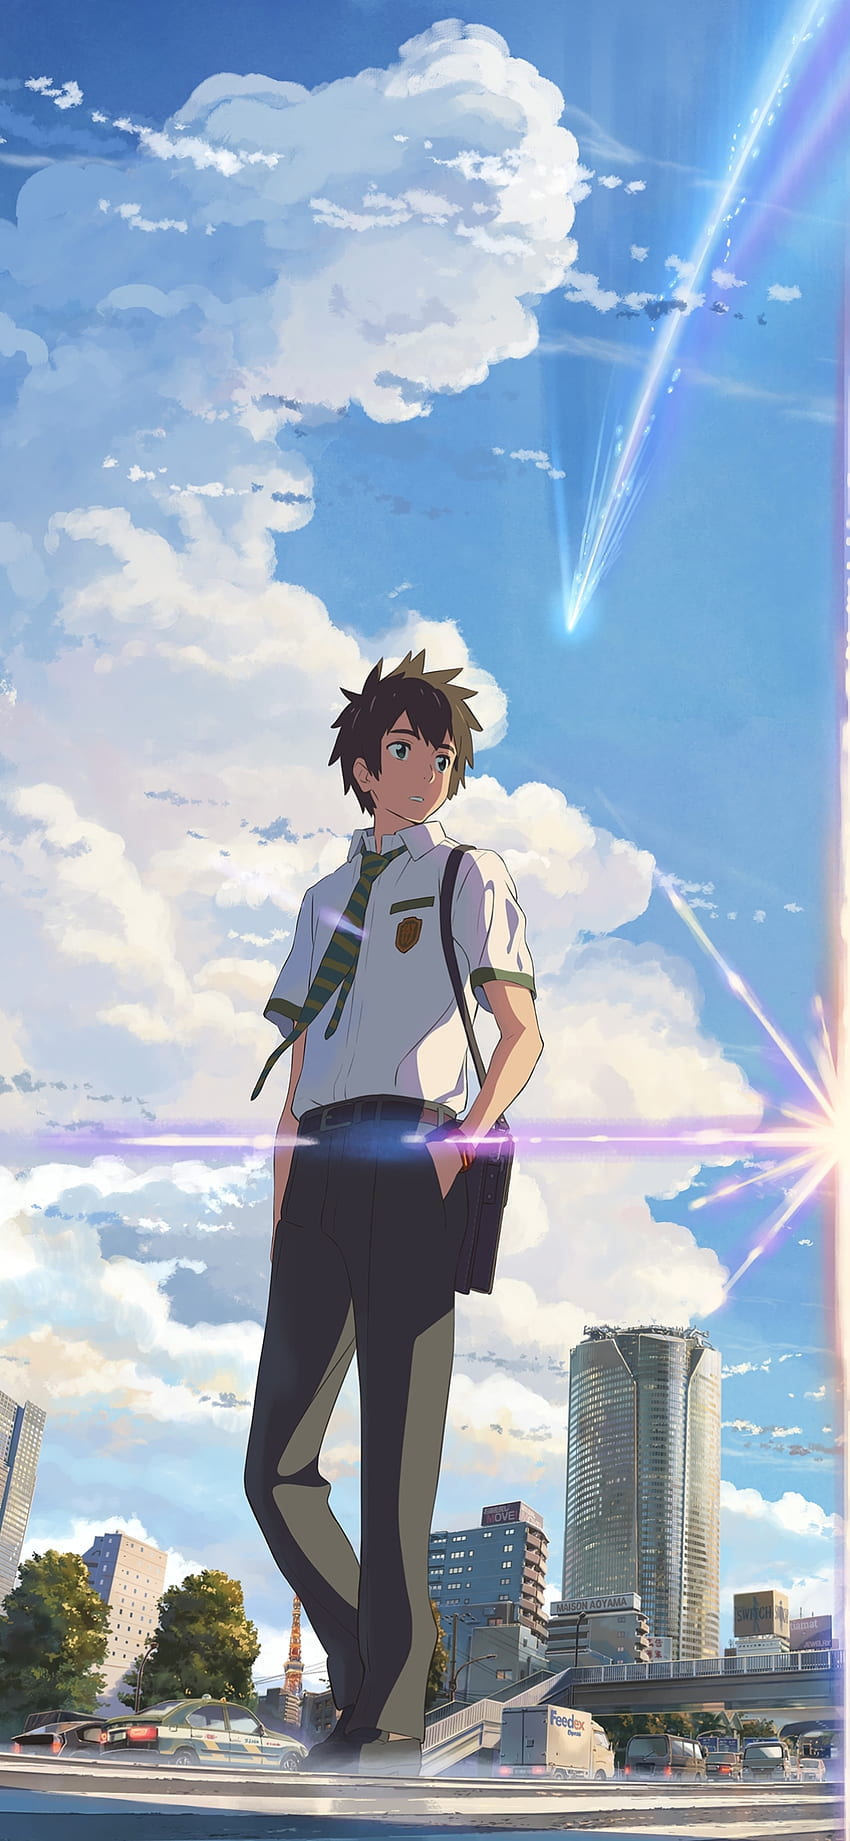 200+] Your Name Anime Wallpapers | Wallpapers.com